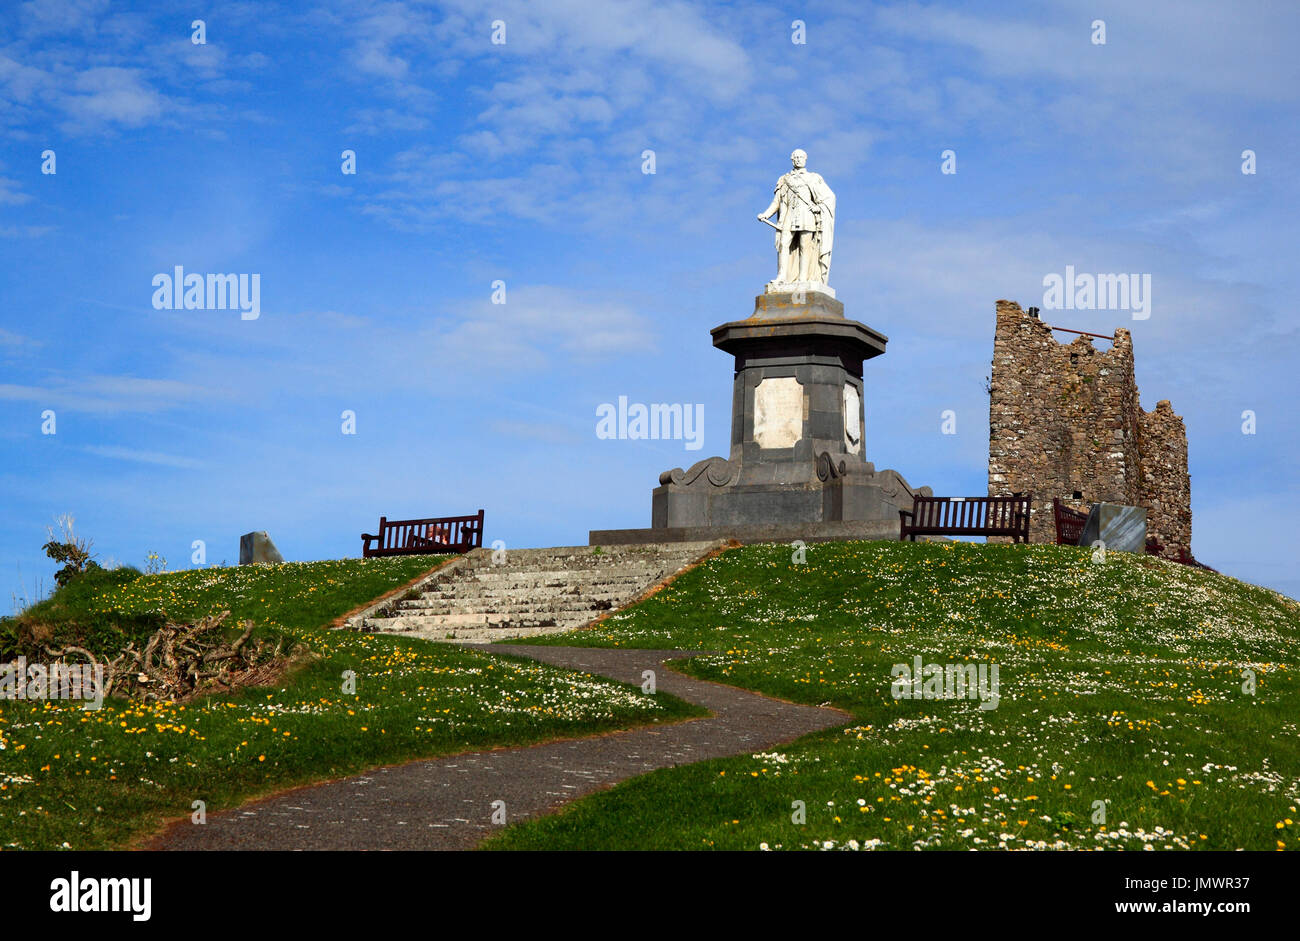 The Prince Albert memorial on Castle Hill ,Tenby, Pembrokeshire, Wales, Europe Stock Photo